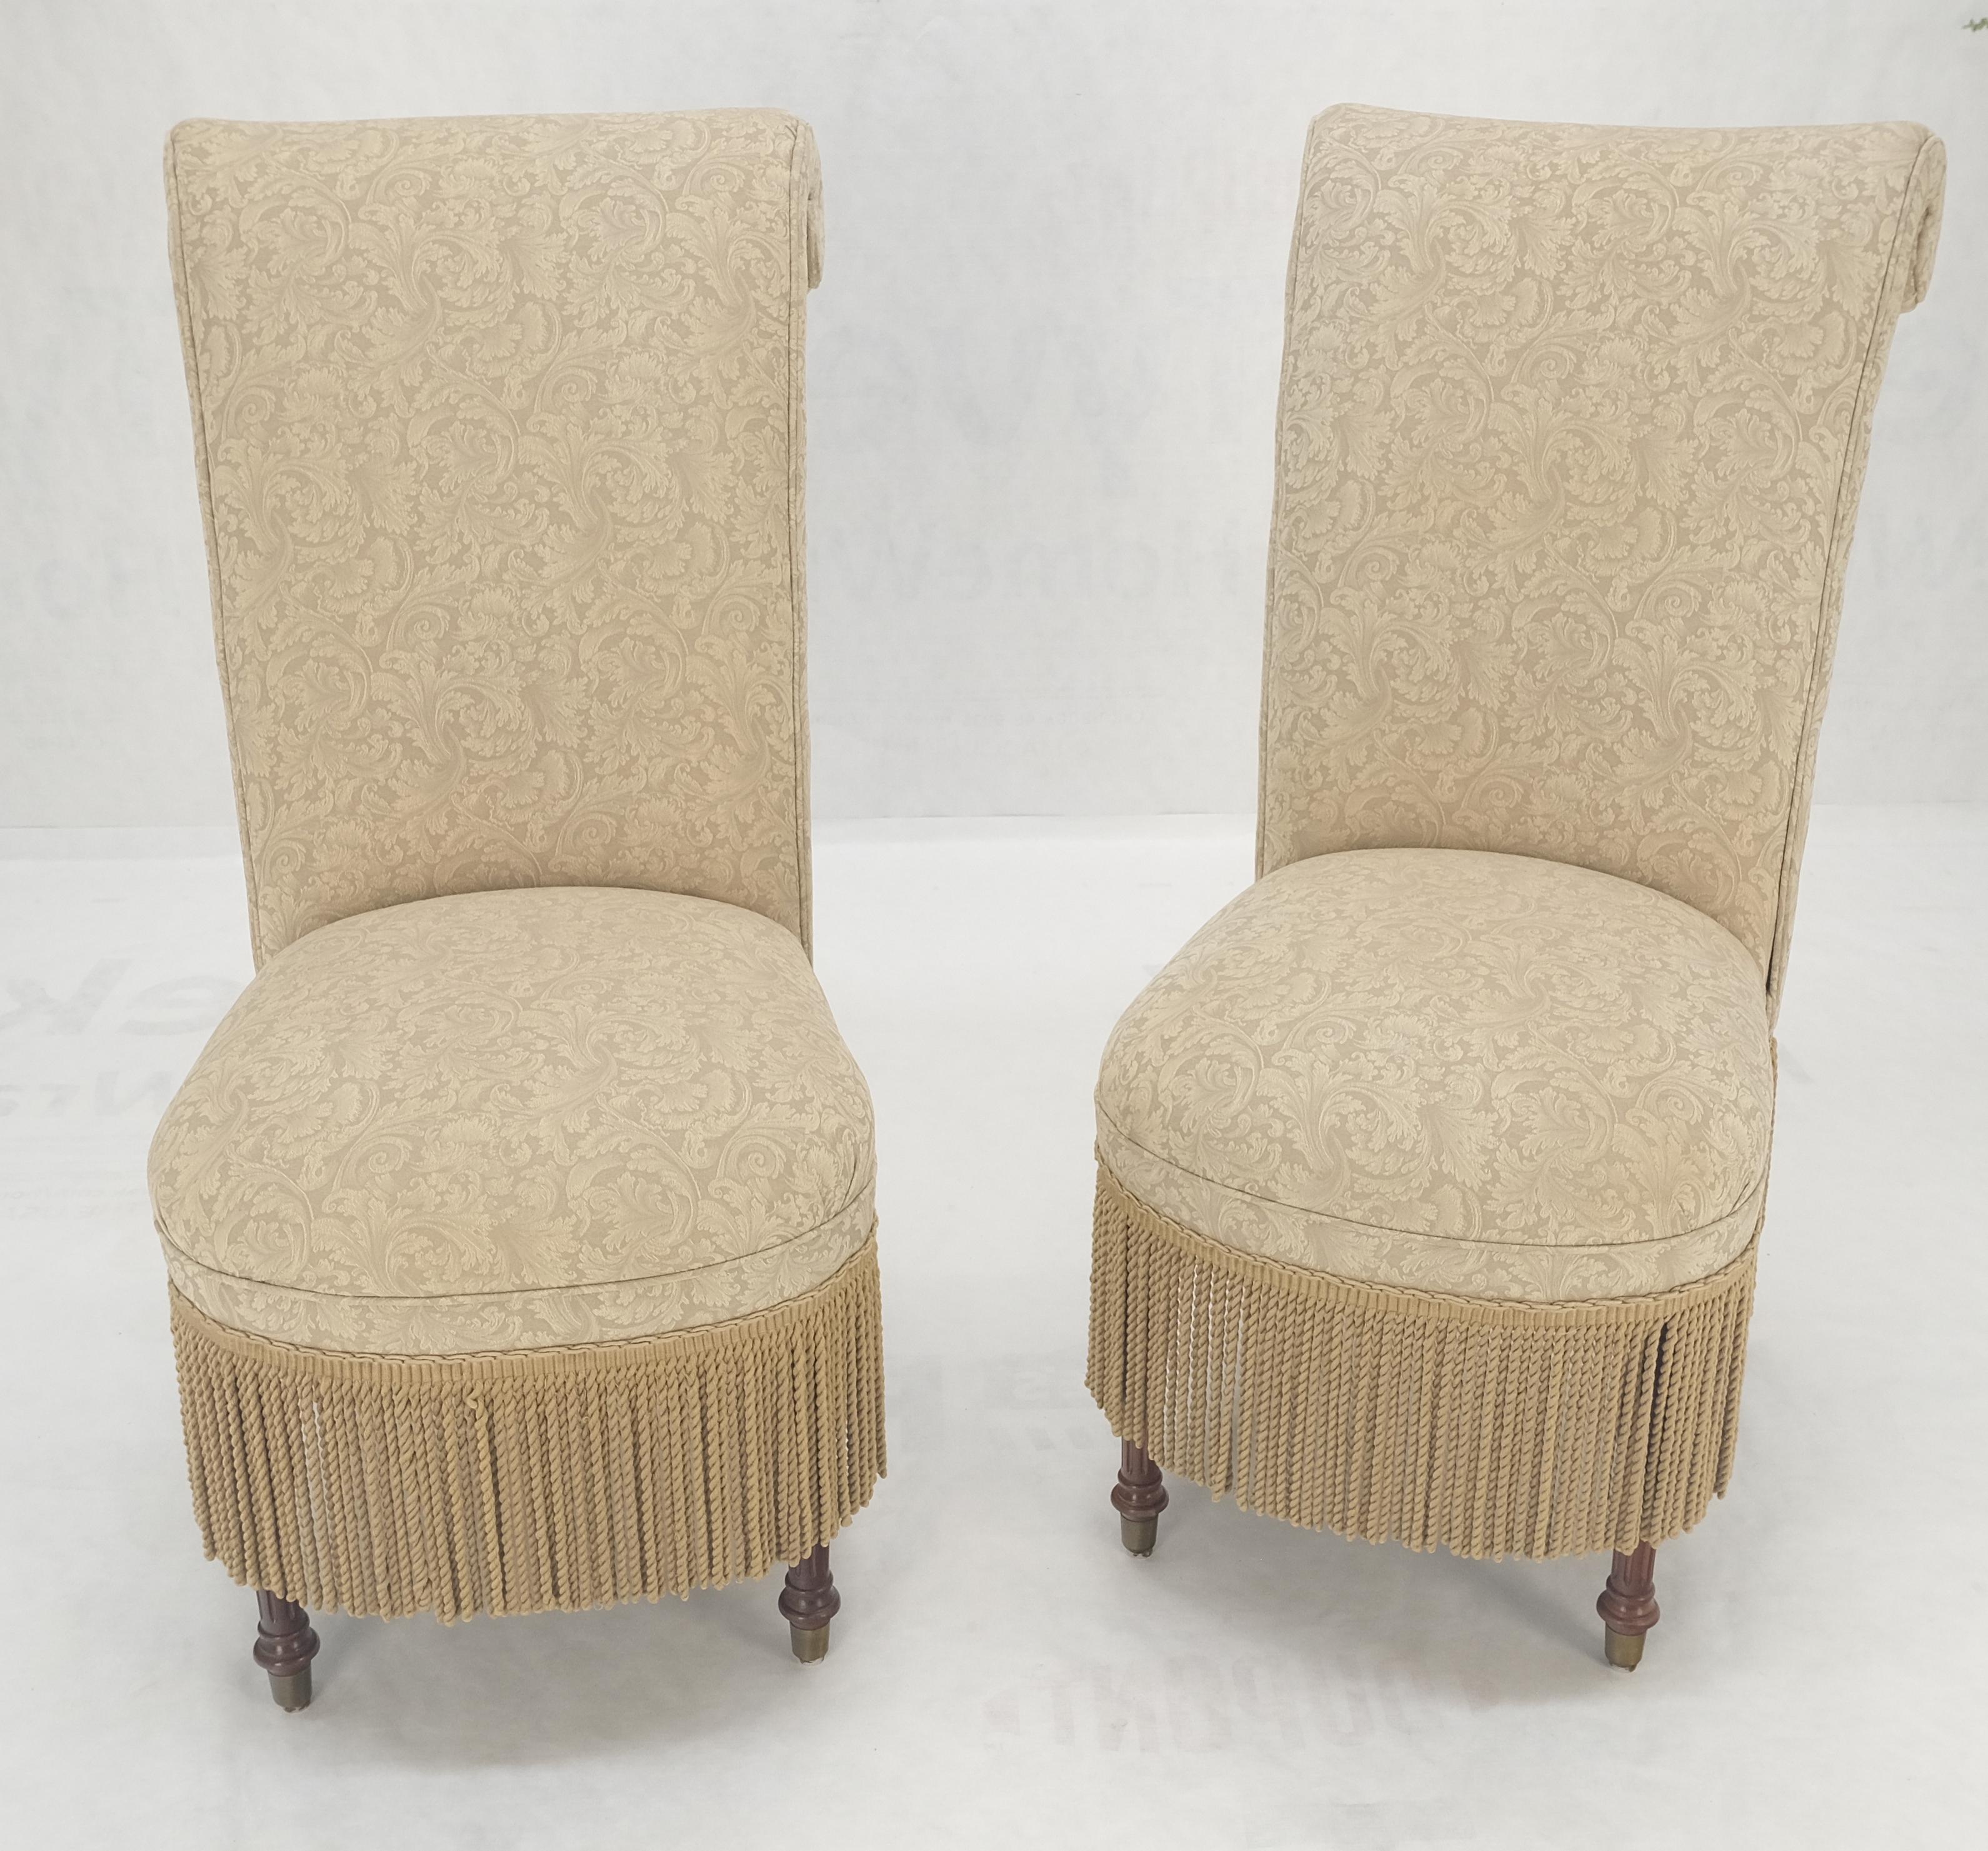 Pair Decorative Turned Mahogany Legs Tassels Decorated Fireside Slip Chair MINT! In Excellent Condition For Sale In Rockaway, NJ